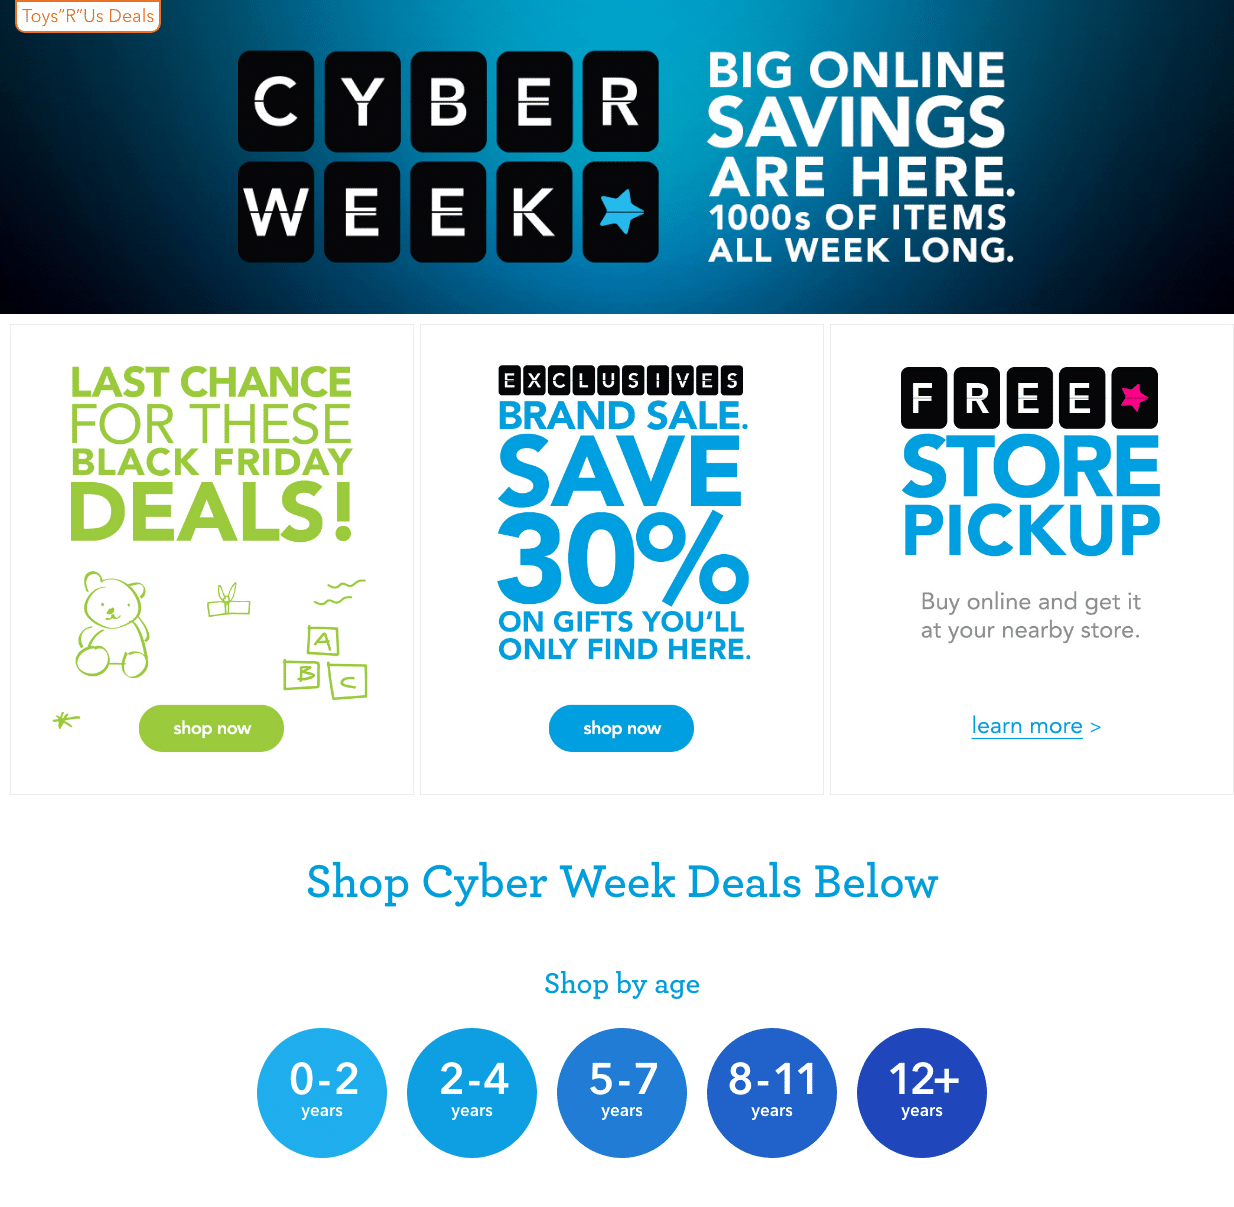 Toys R Us Cyber Deals